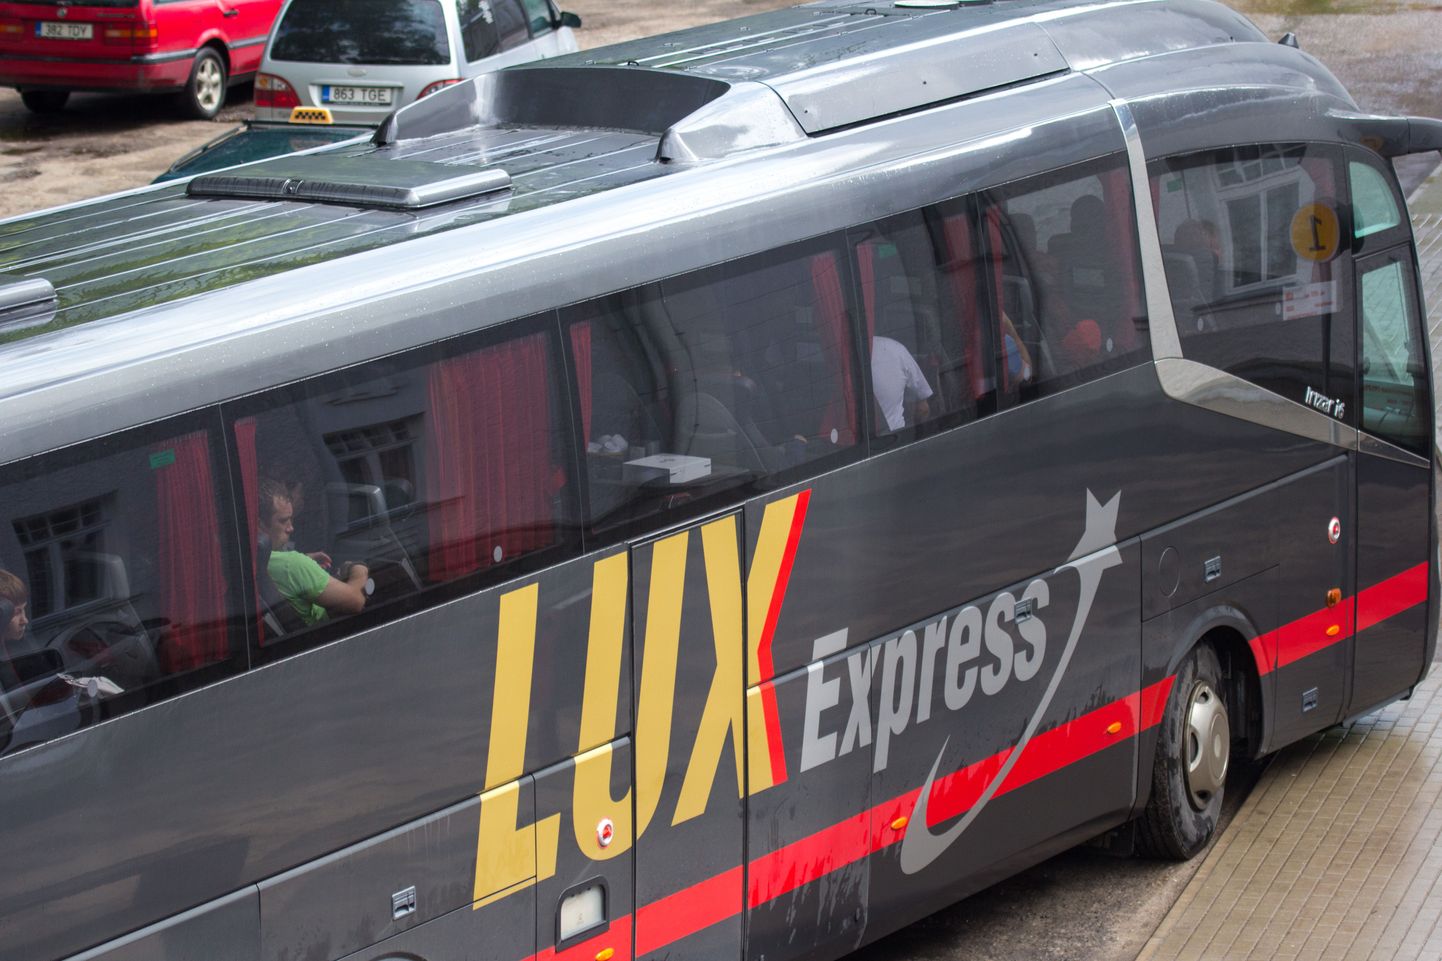 Lux Express.